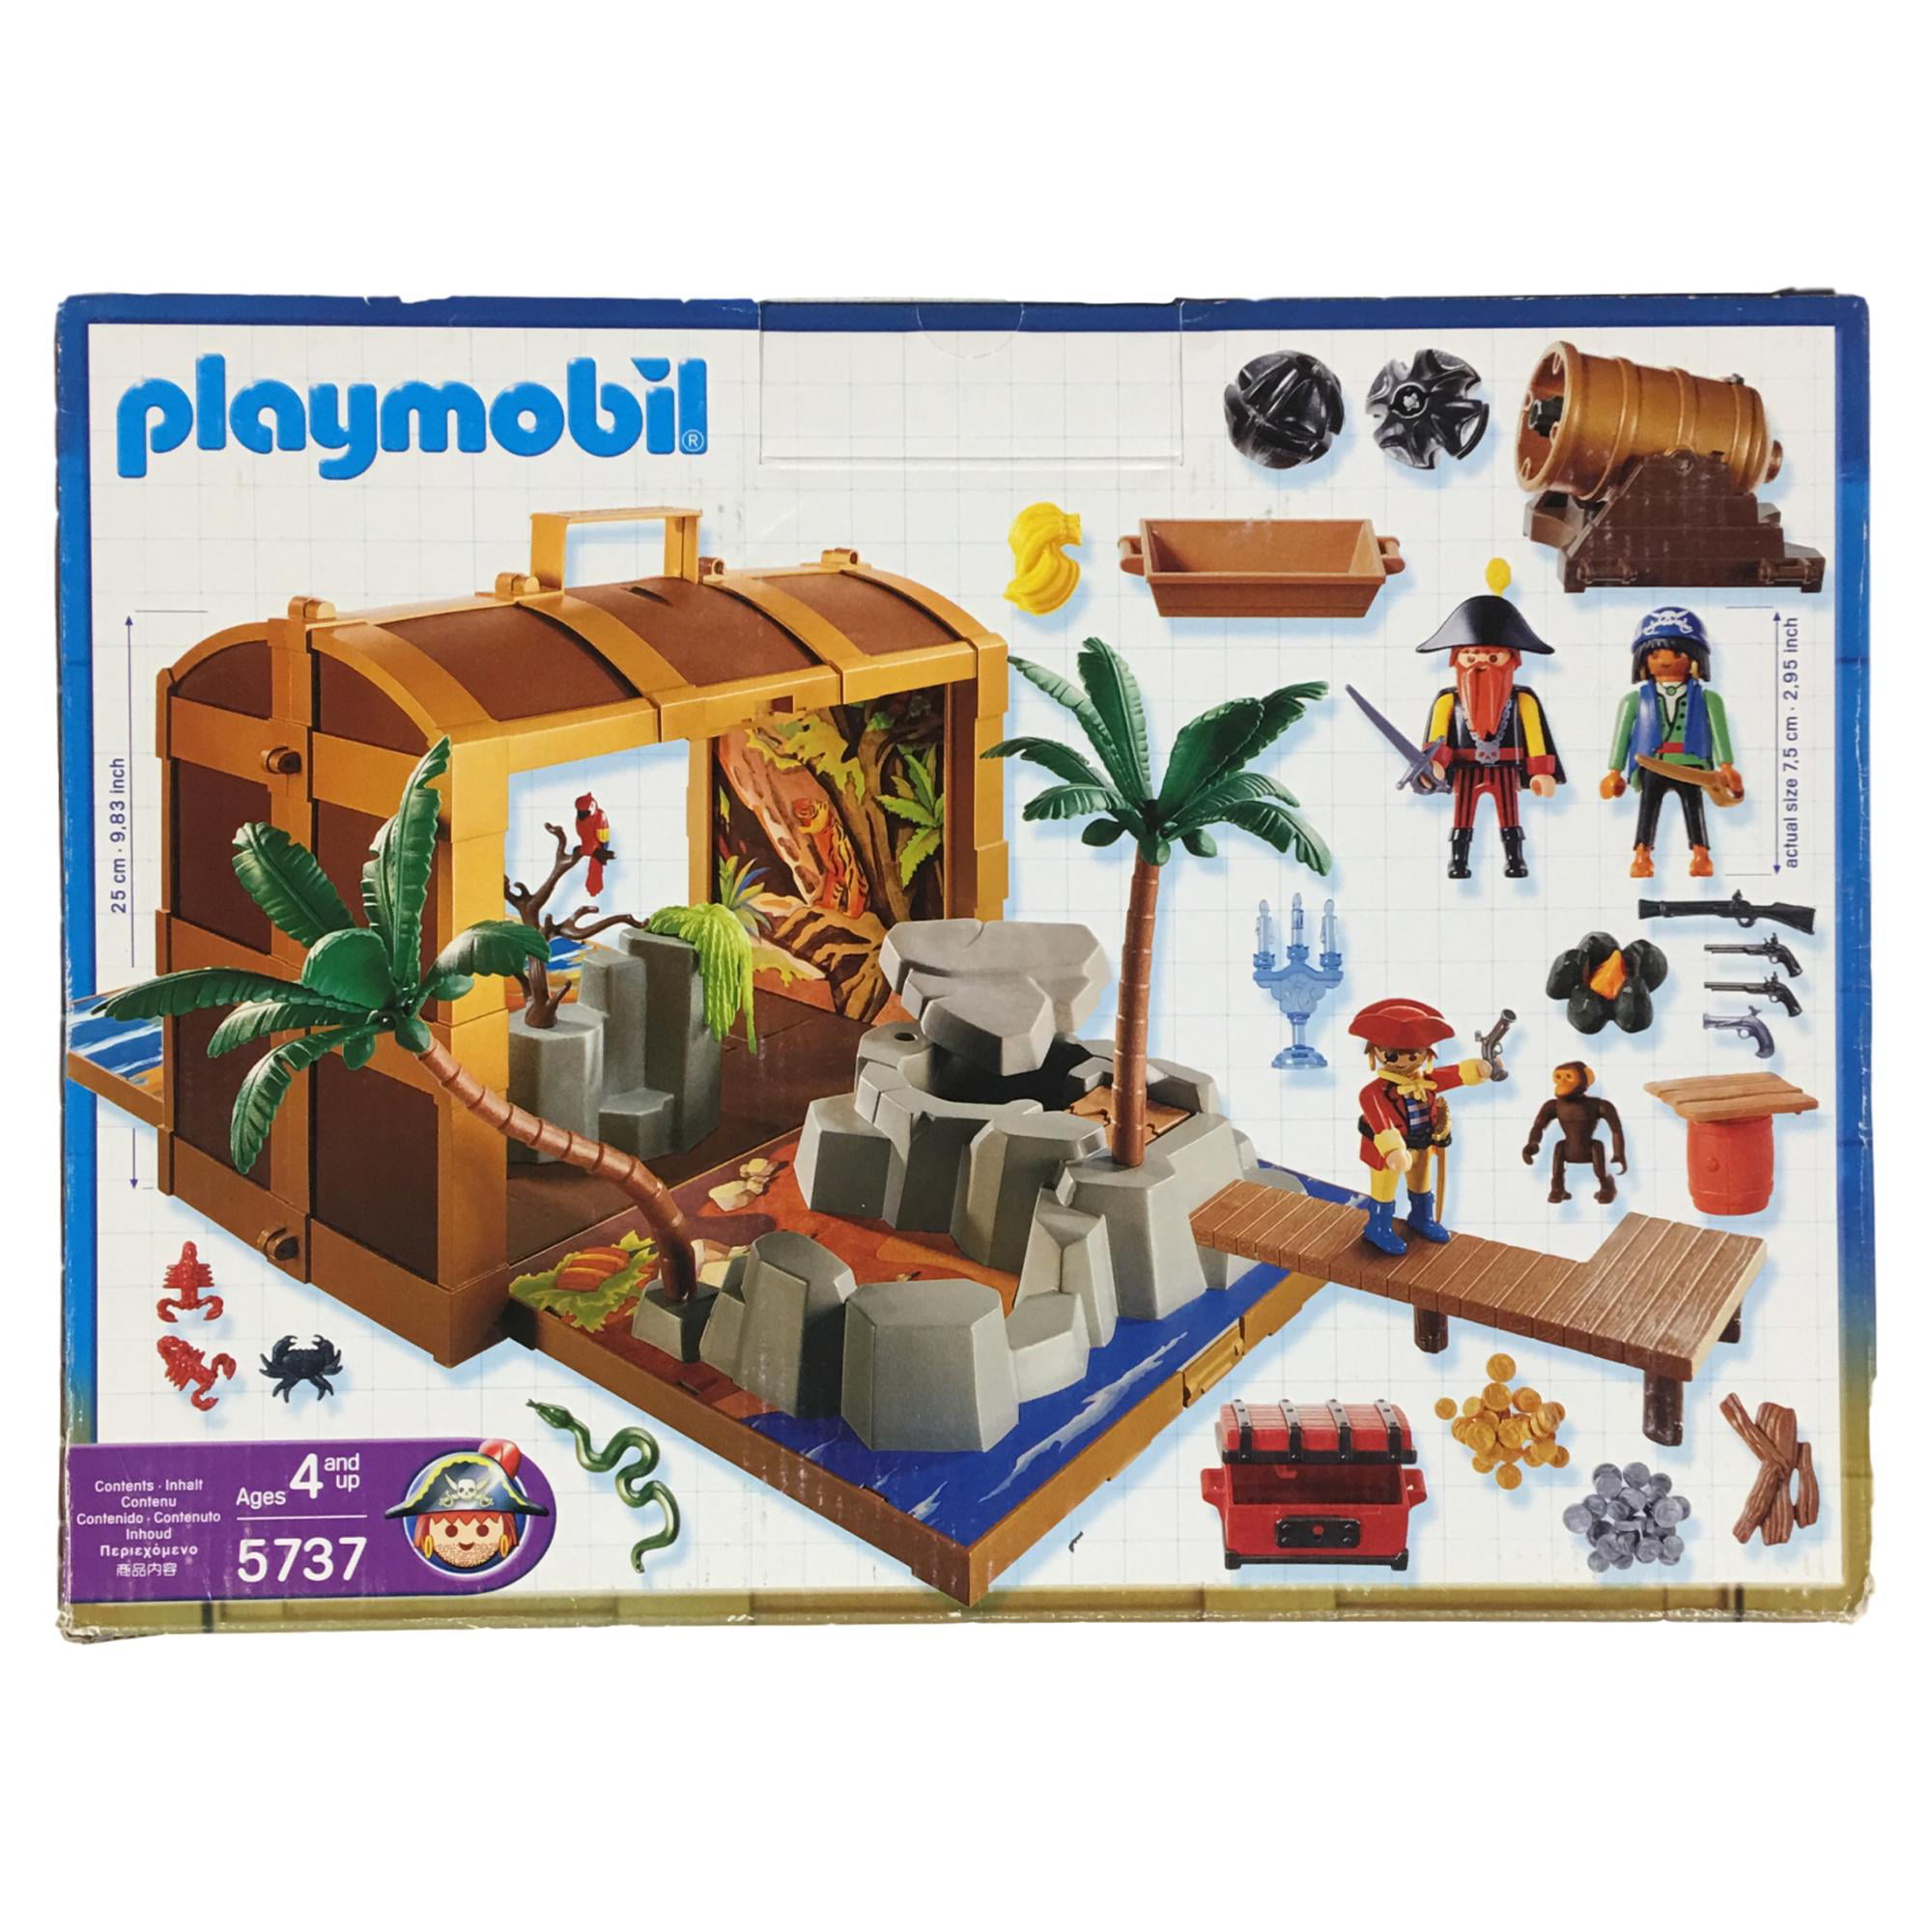 Playmobil Chest Crate Box tan With Lid Freight 